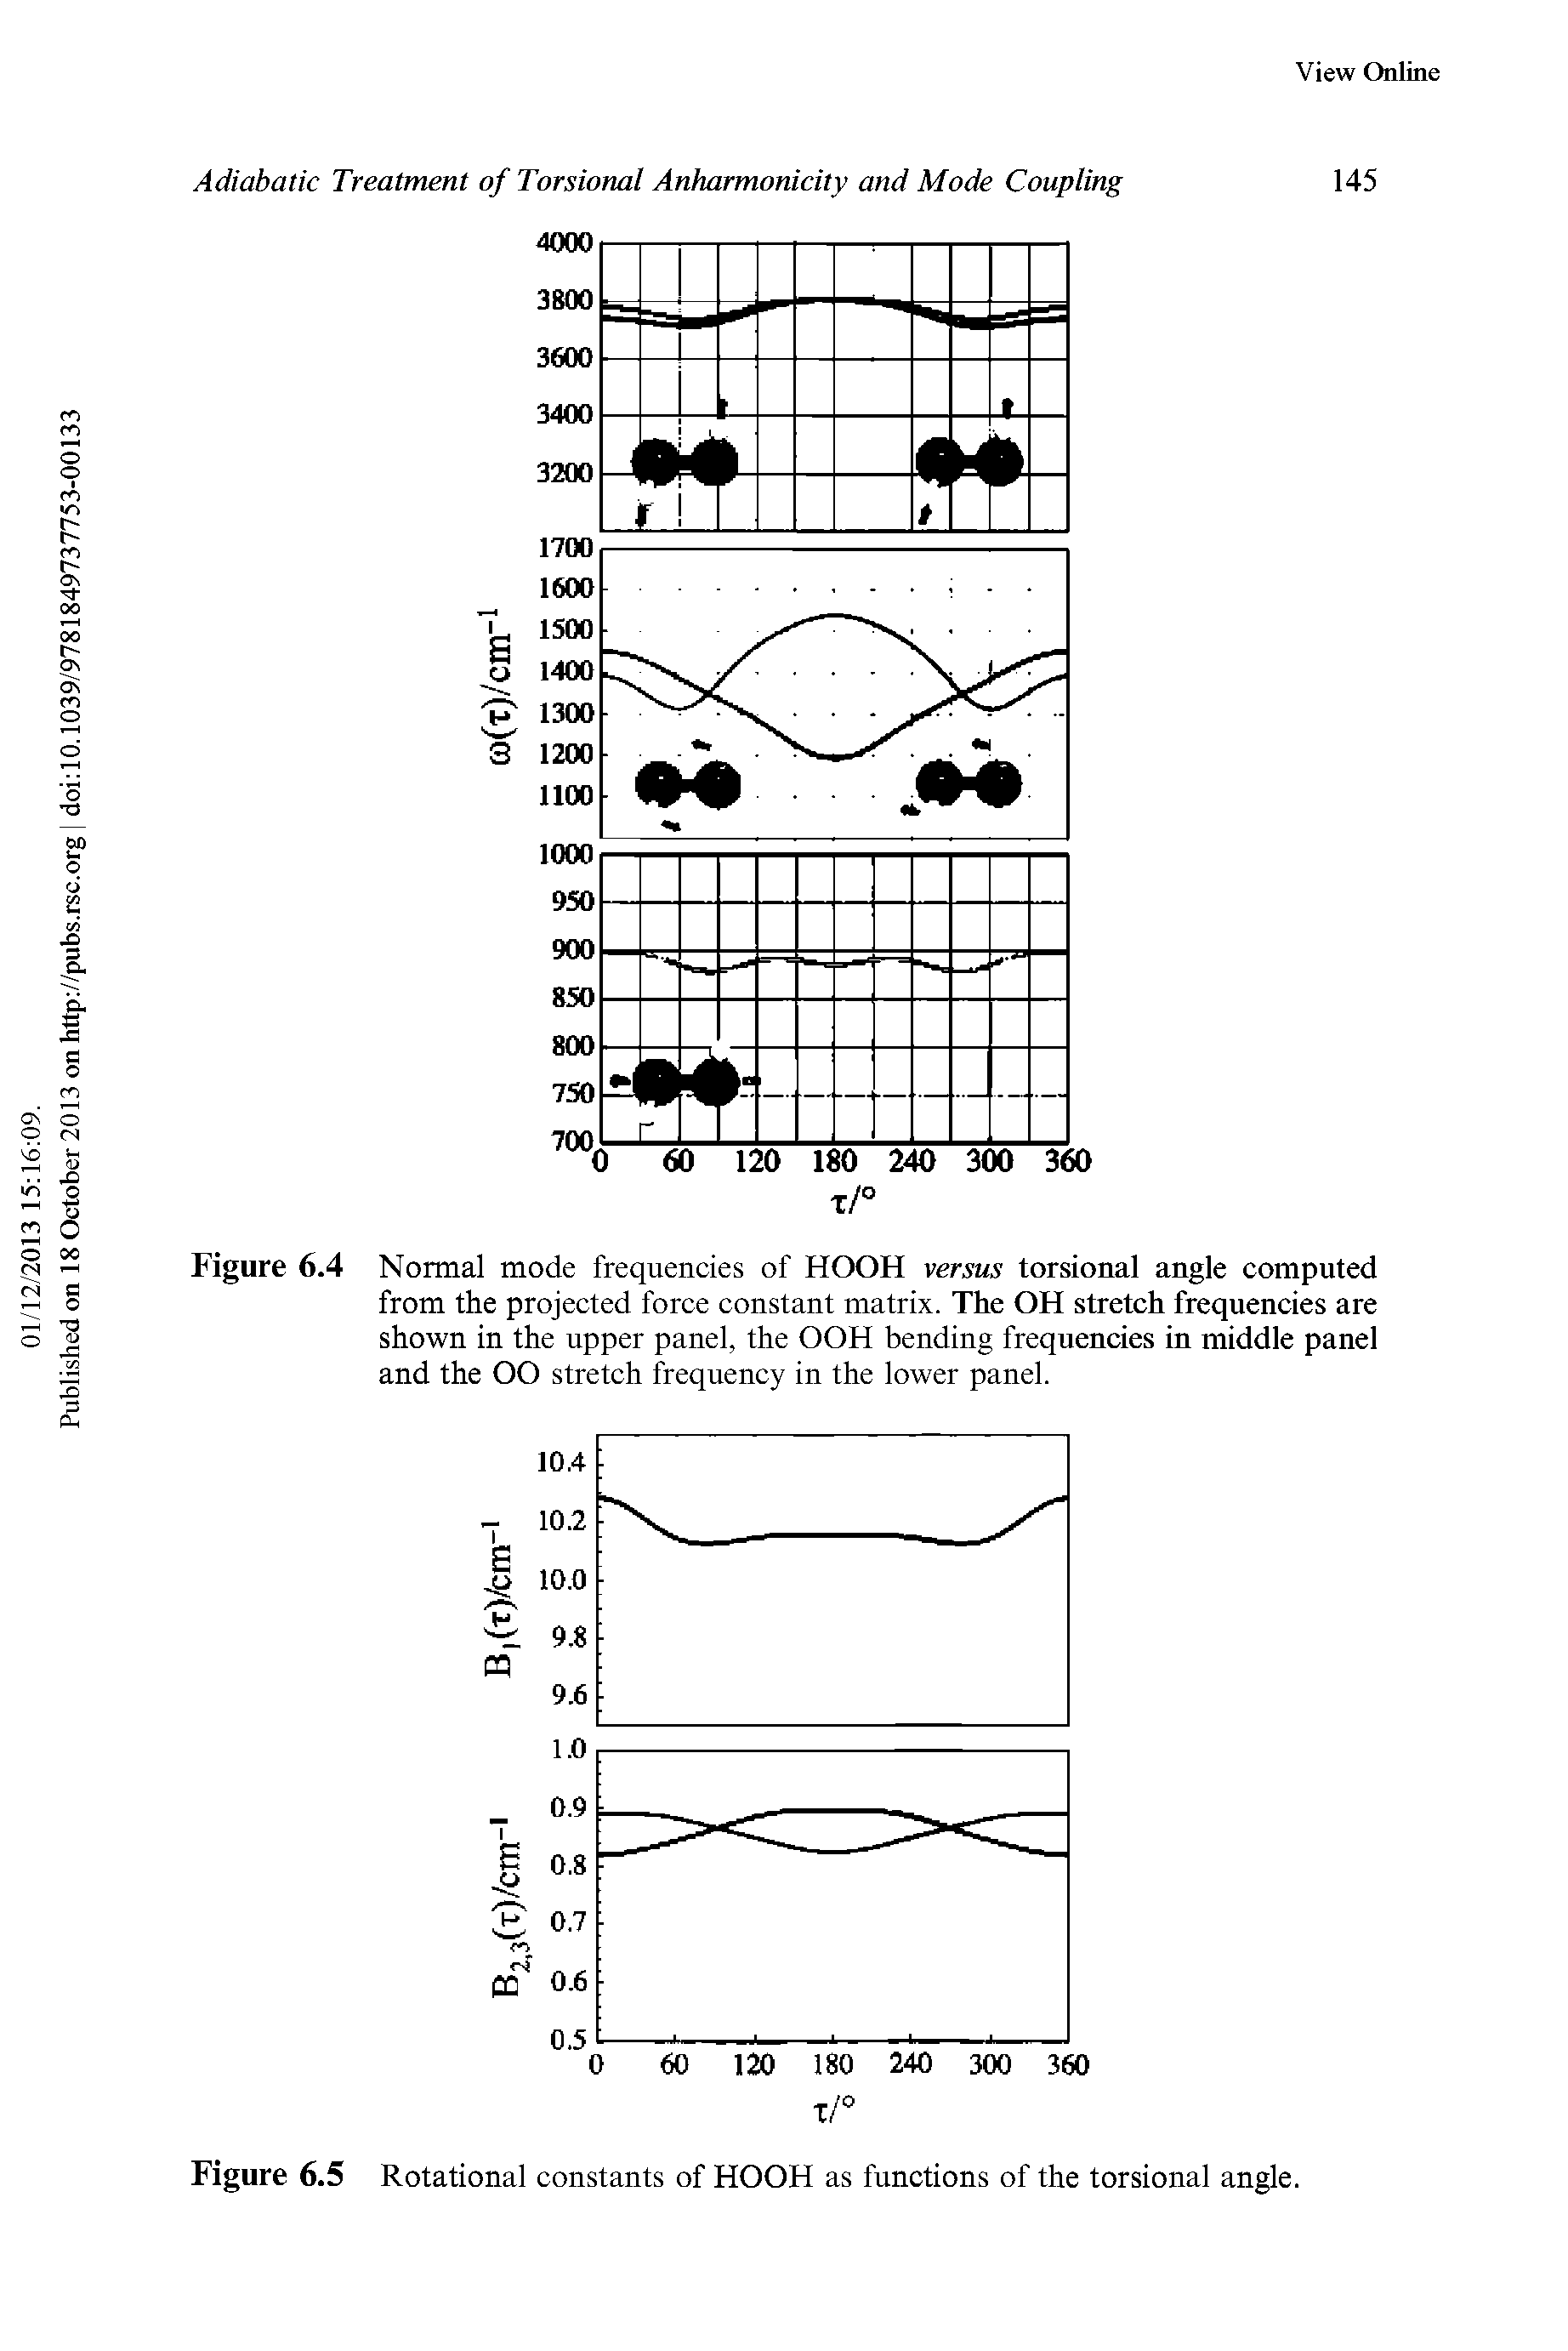 Figure 6.4 Normal mode frequencies of HOOH versus torsional angle computed from the projected force constant matrix. The OH stretch frequencies are shown in the upper panel, the OOH bending frequencies in middle panel and the 00 stretch frequency in the lower panel.